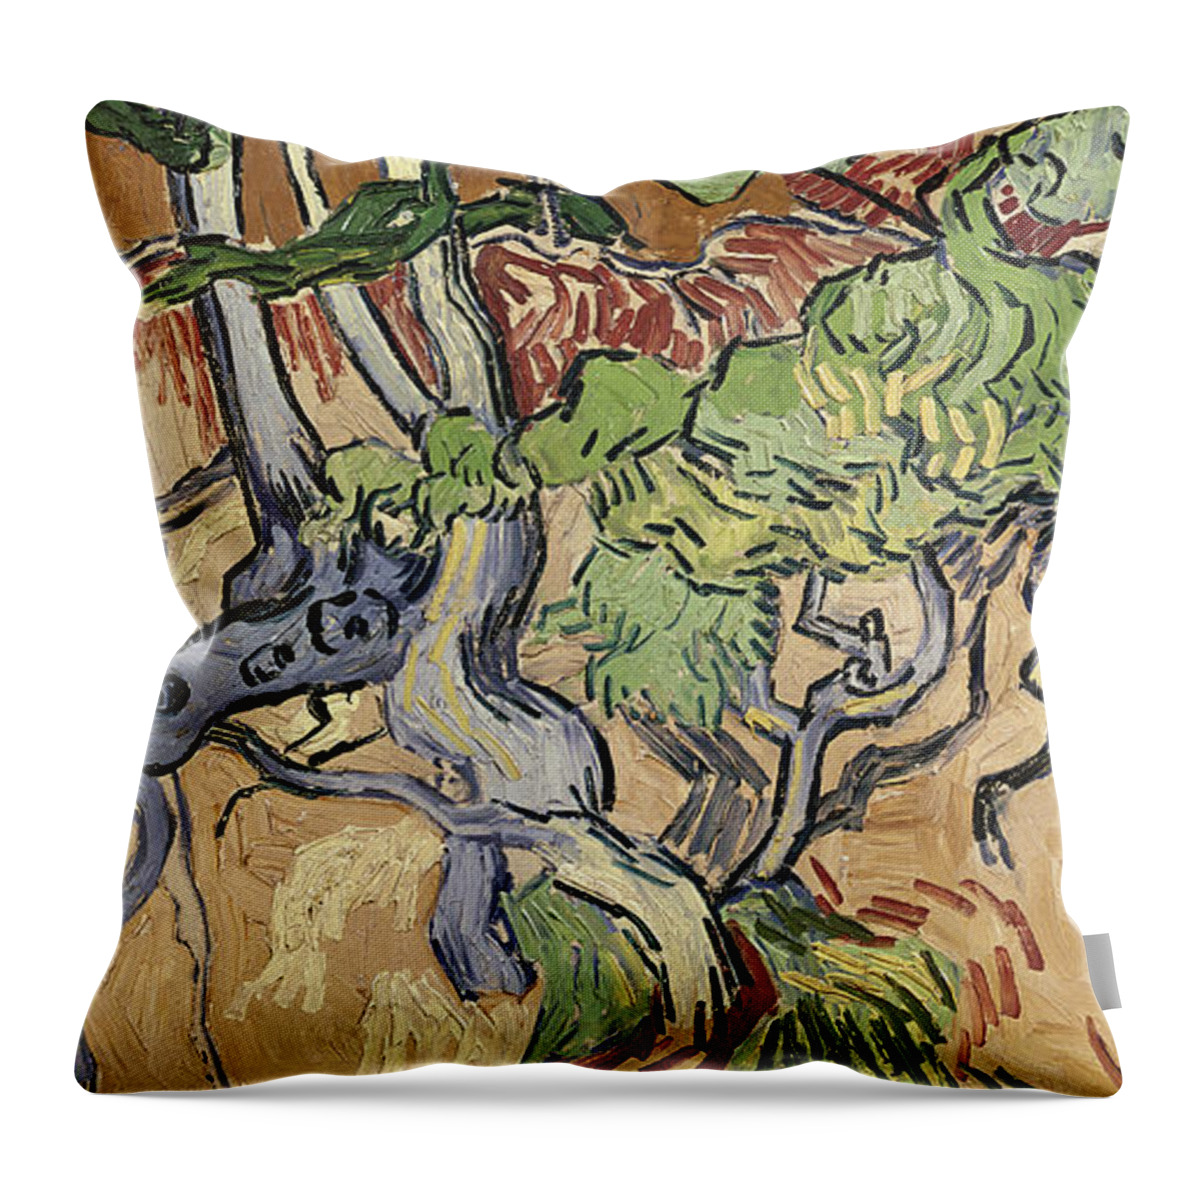 Landscape Throw Pillow featuring the painting Tree Roots by Vincent Van Gogh